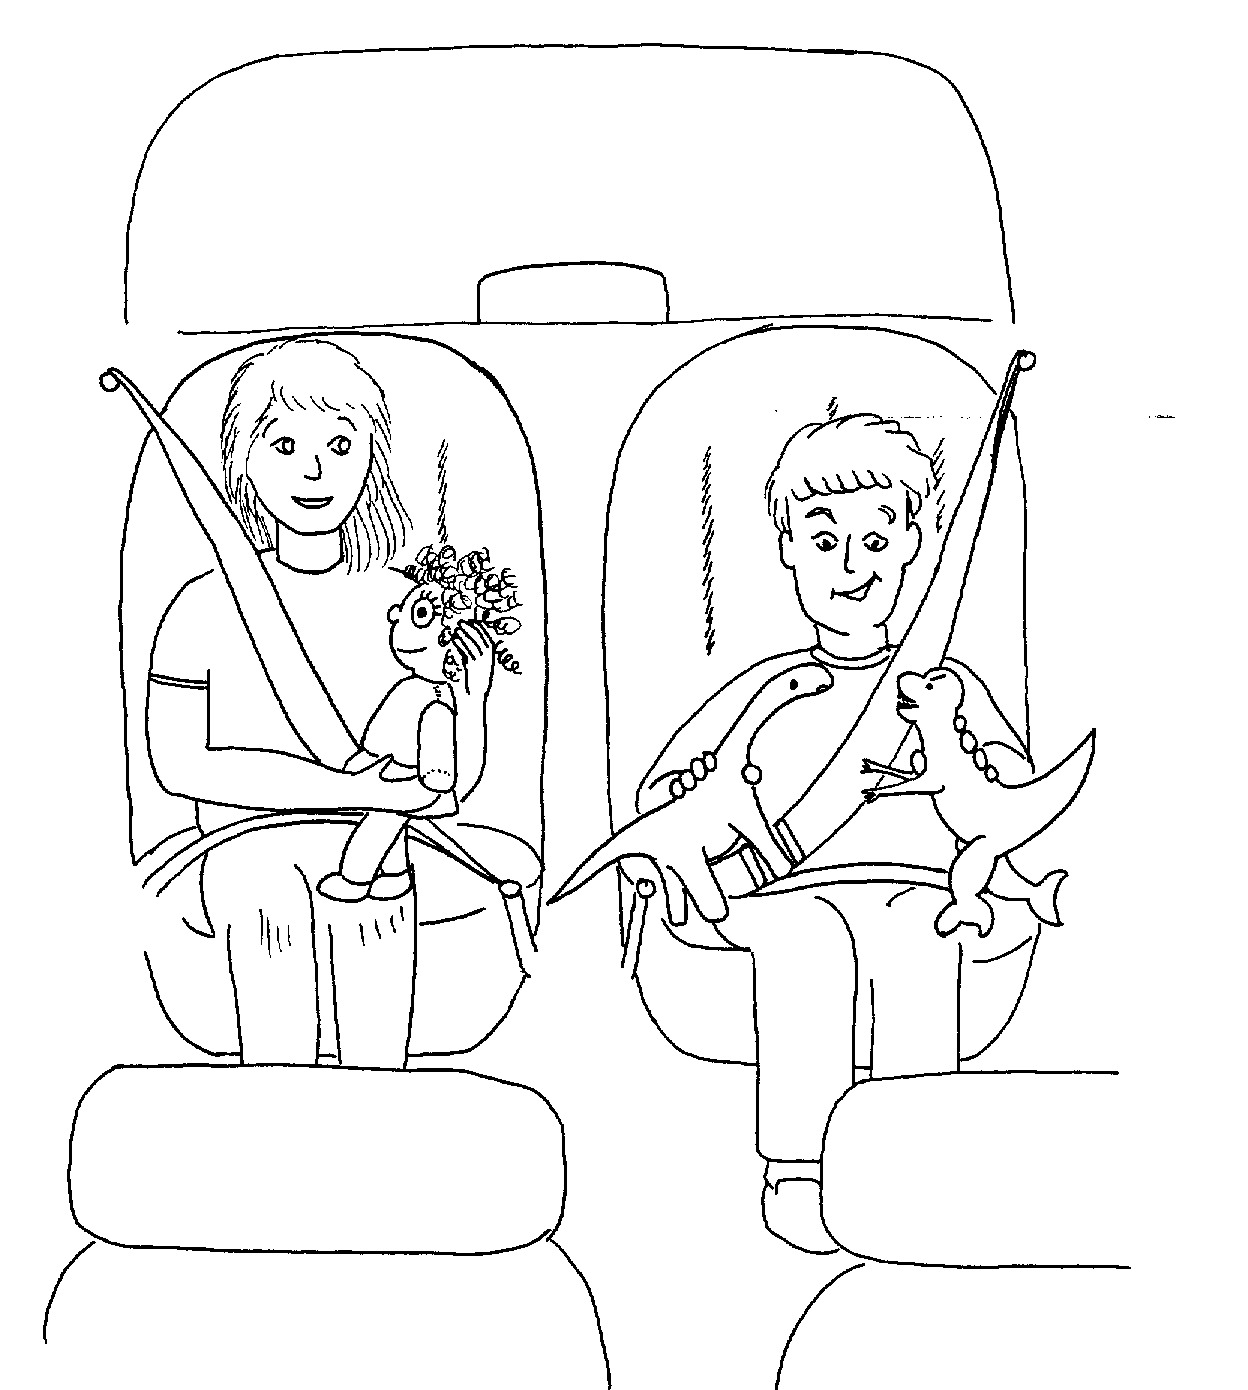 Belt Buckle Coloring Pages - Coloring Pages For All Ages